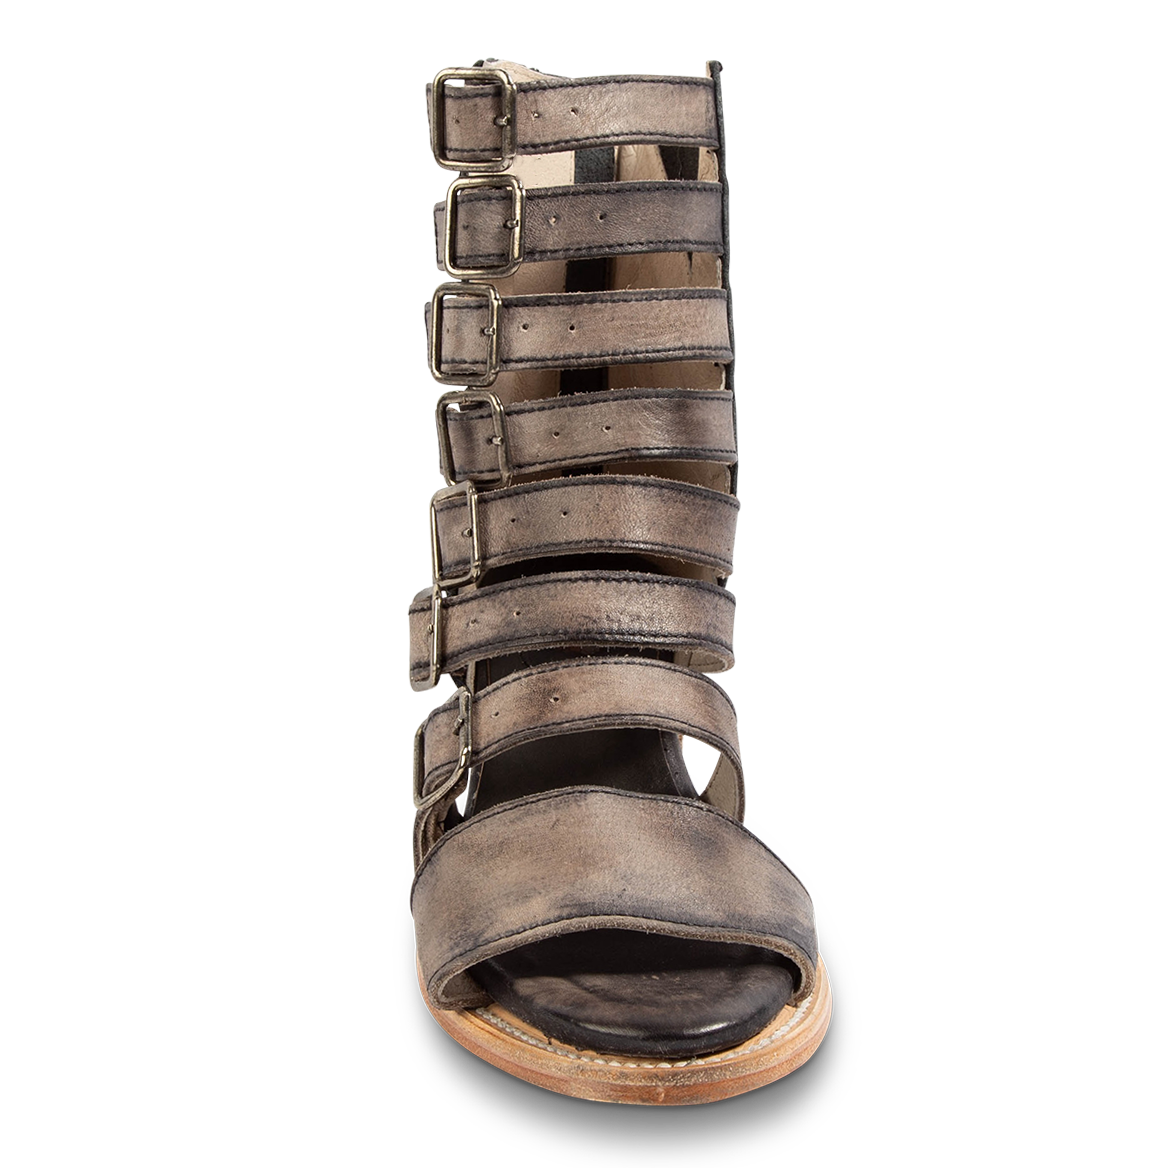 Front view showing FREEBIRD women's Country black distressed leather sandal with an open toe and adjustable leather straps